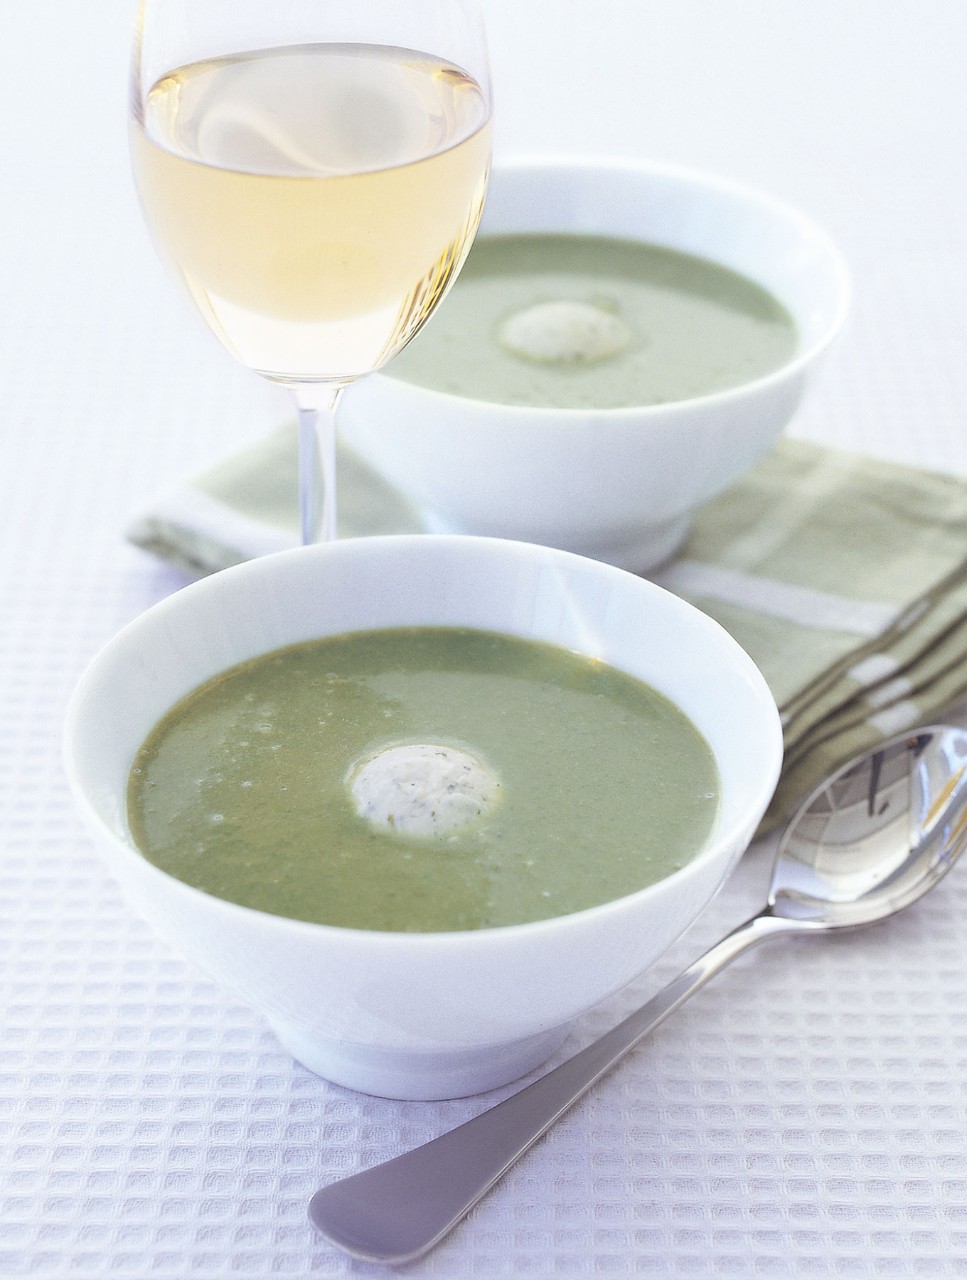 Green Pea Soup with Mint Gelato